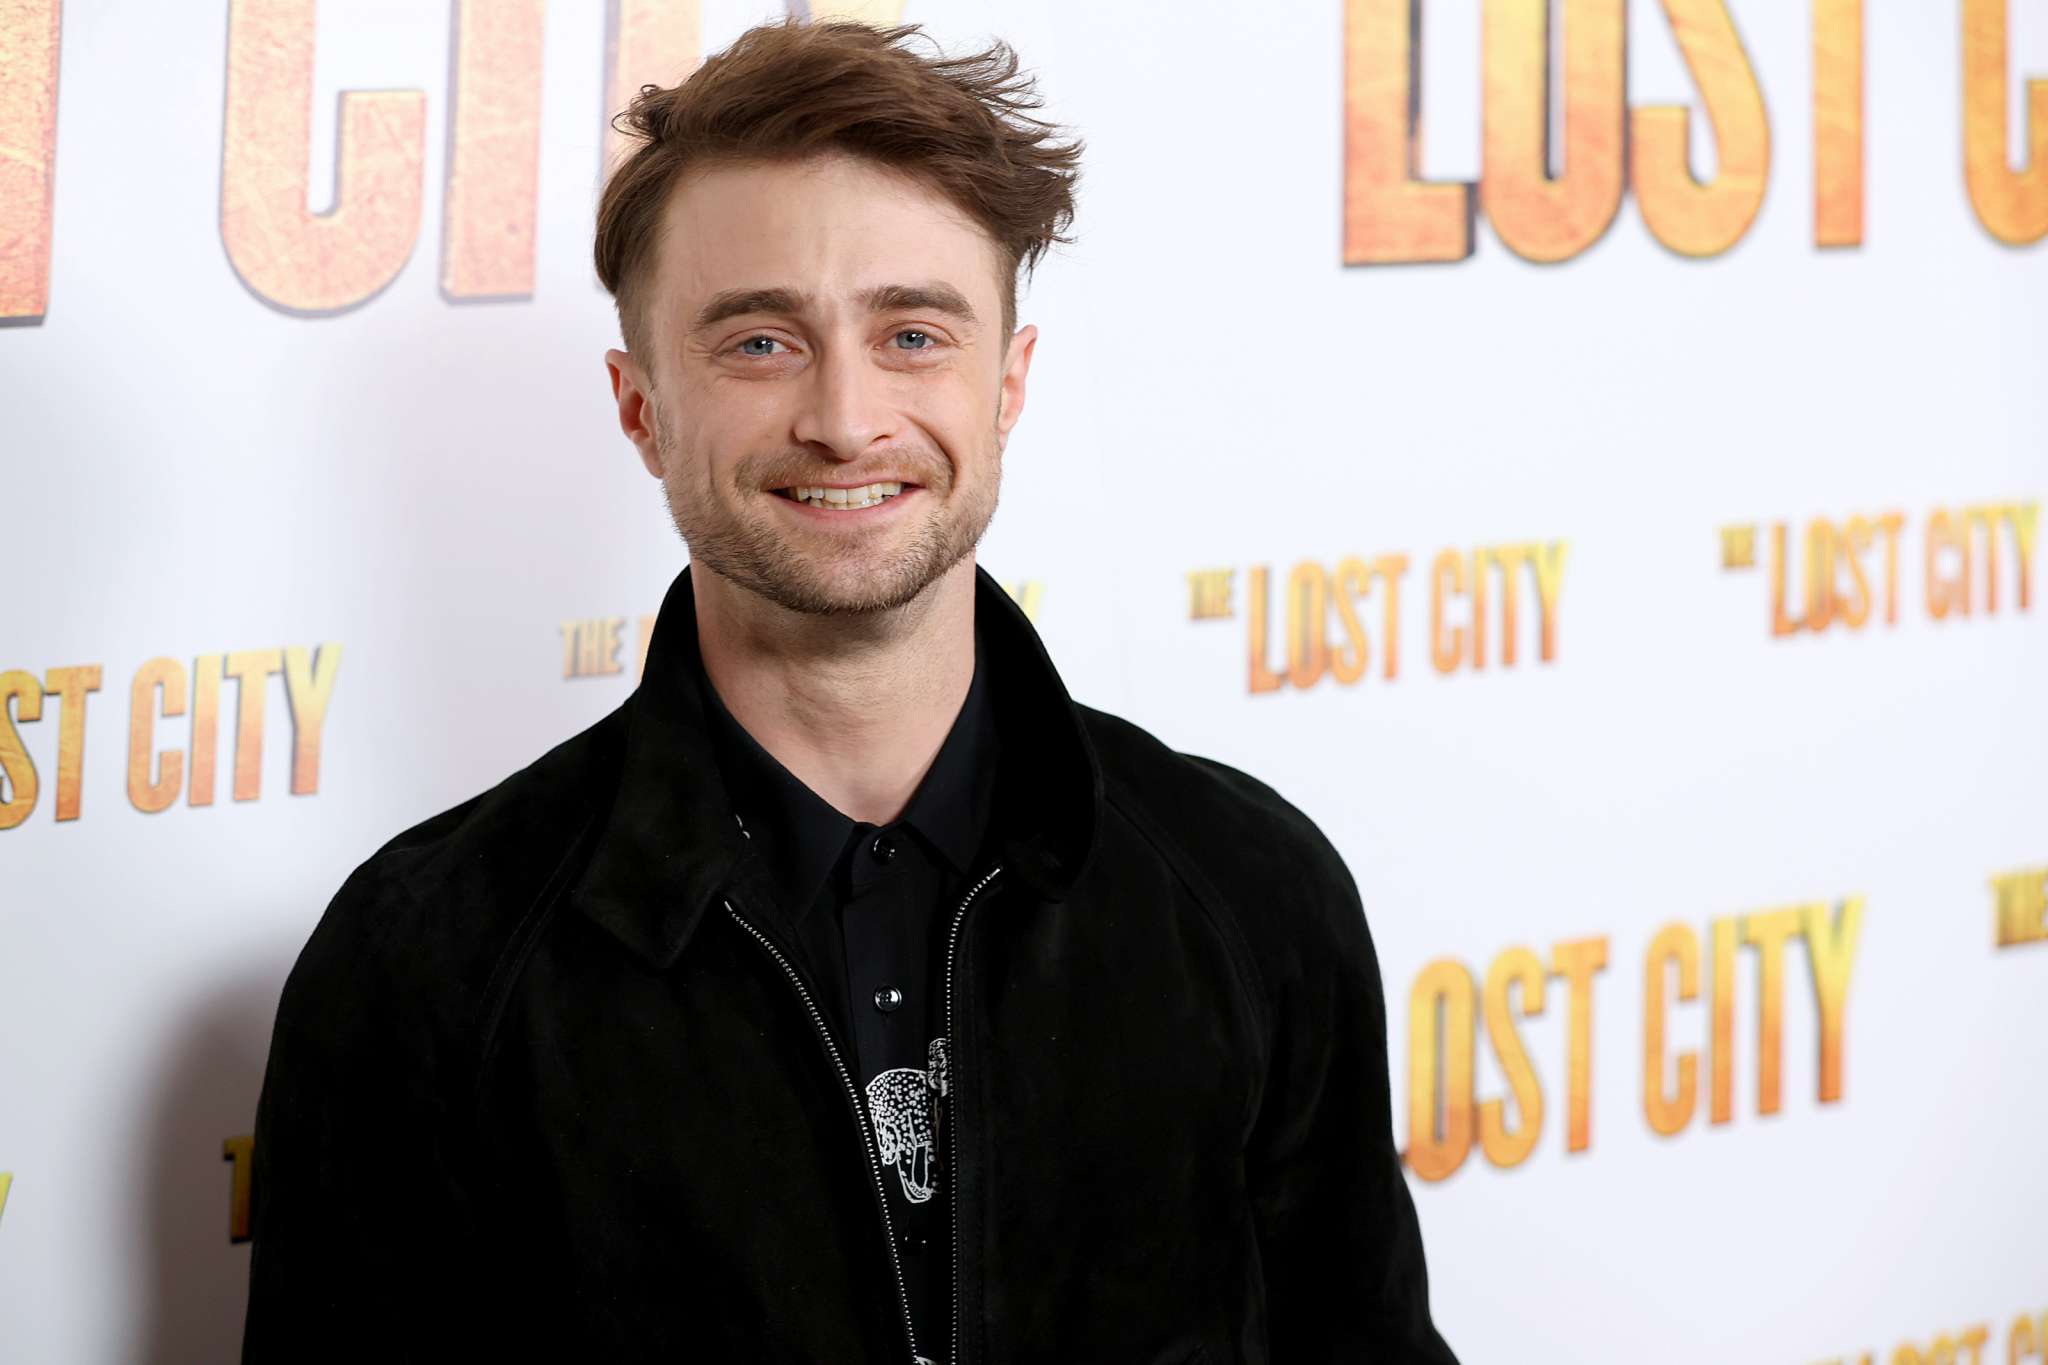 Daniel Radcliffe Dishes Out The Real Reason Why He Played Harry Potter